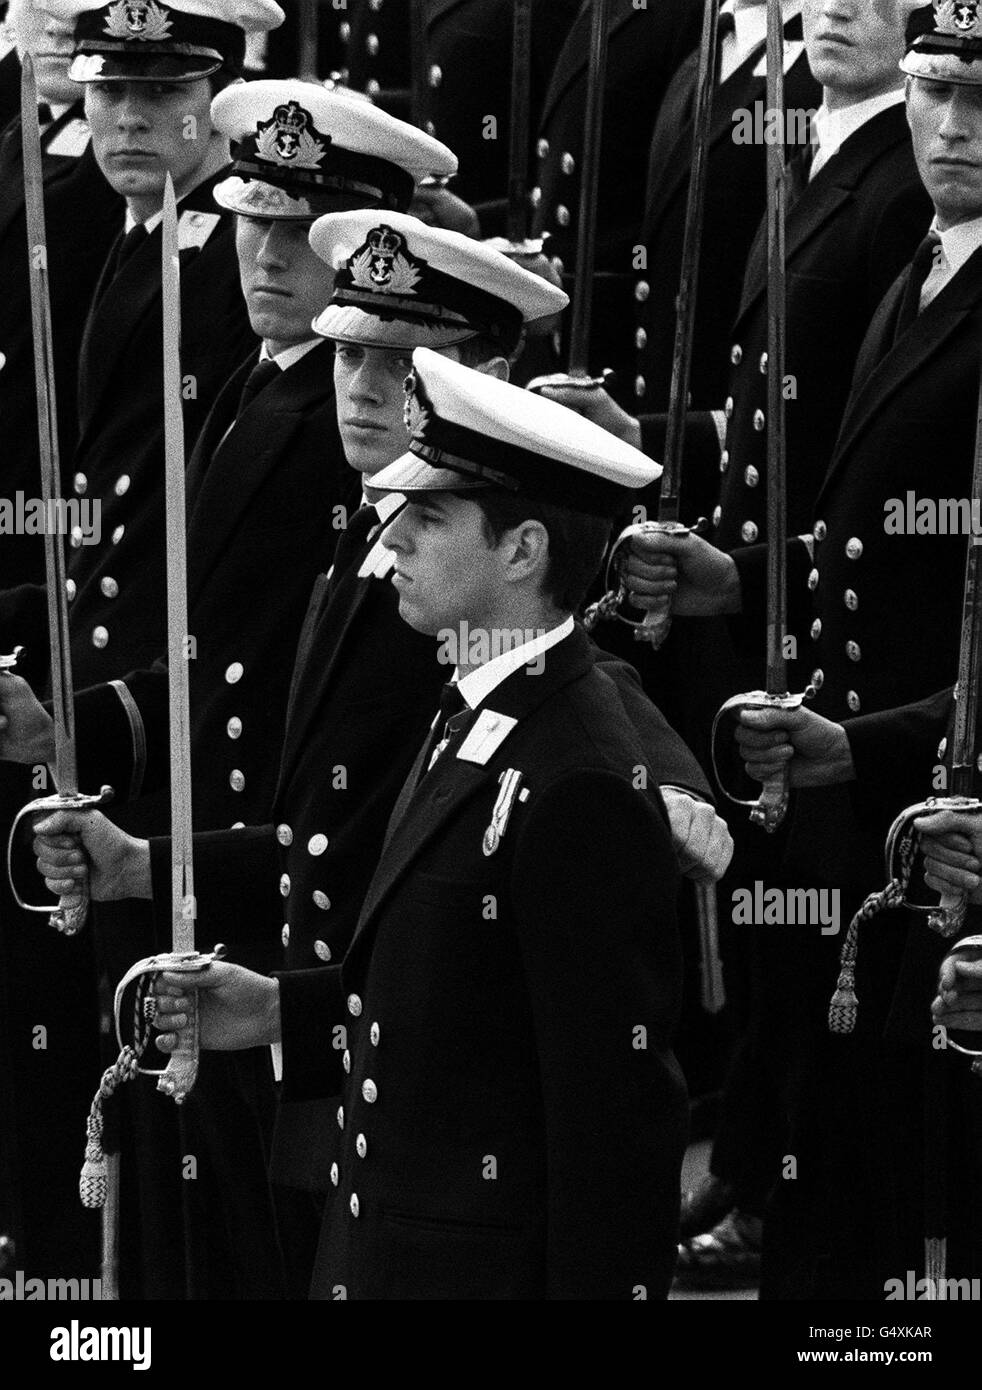 Prince andrew uniform Black and White Stock Photos & Images - Alamy